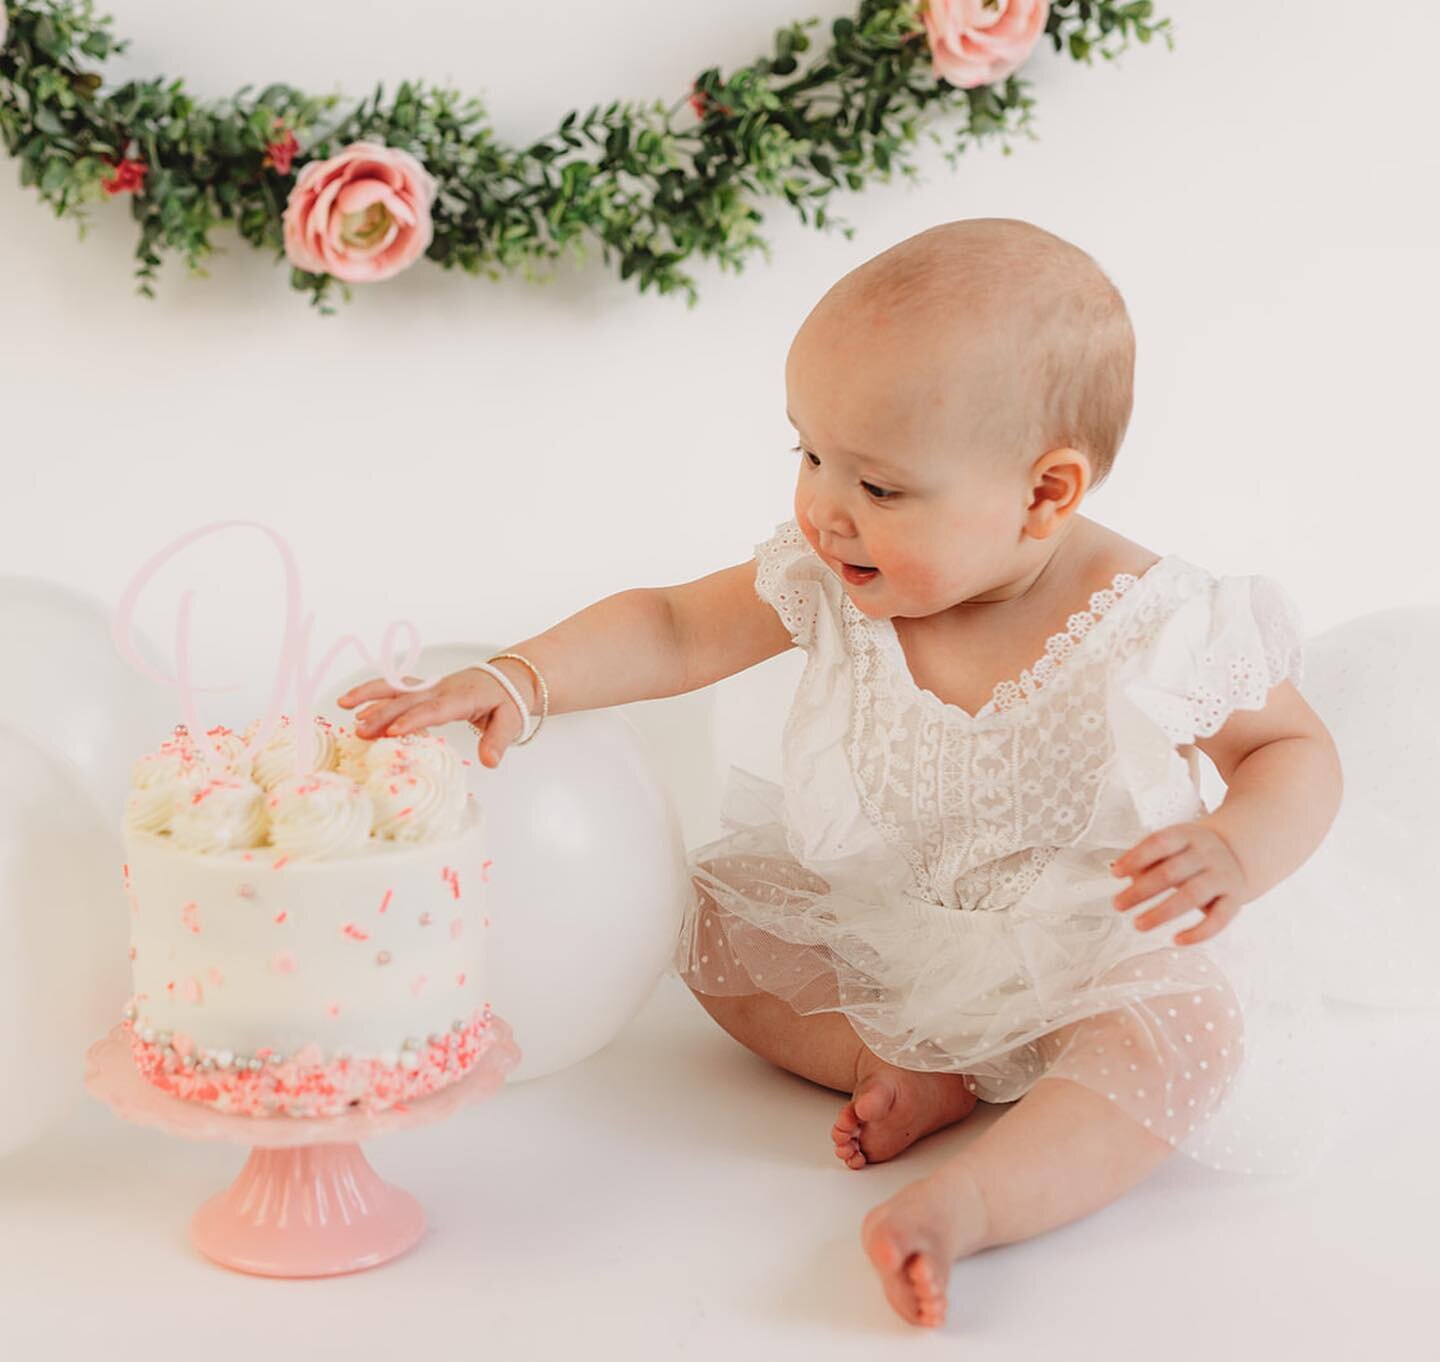 peyton is one! 🤍

📸 @21vinesphotography 
🎂 @lilbitesconfections 
1️⃣ @rusticfairindy for the cutest cake topper